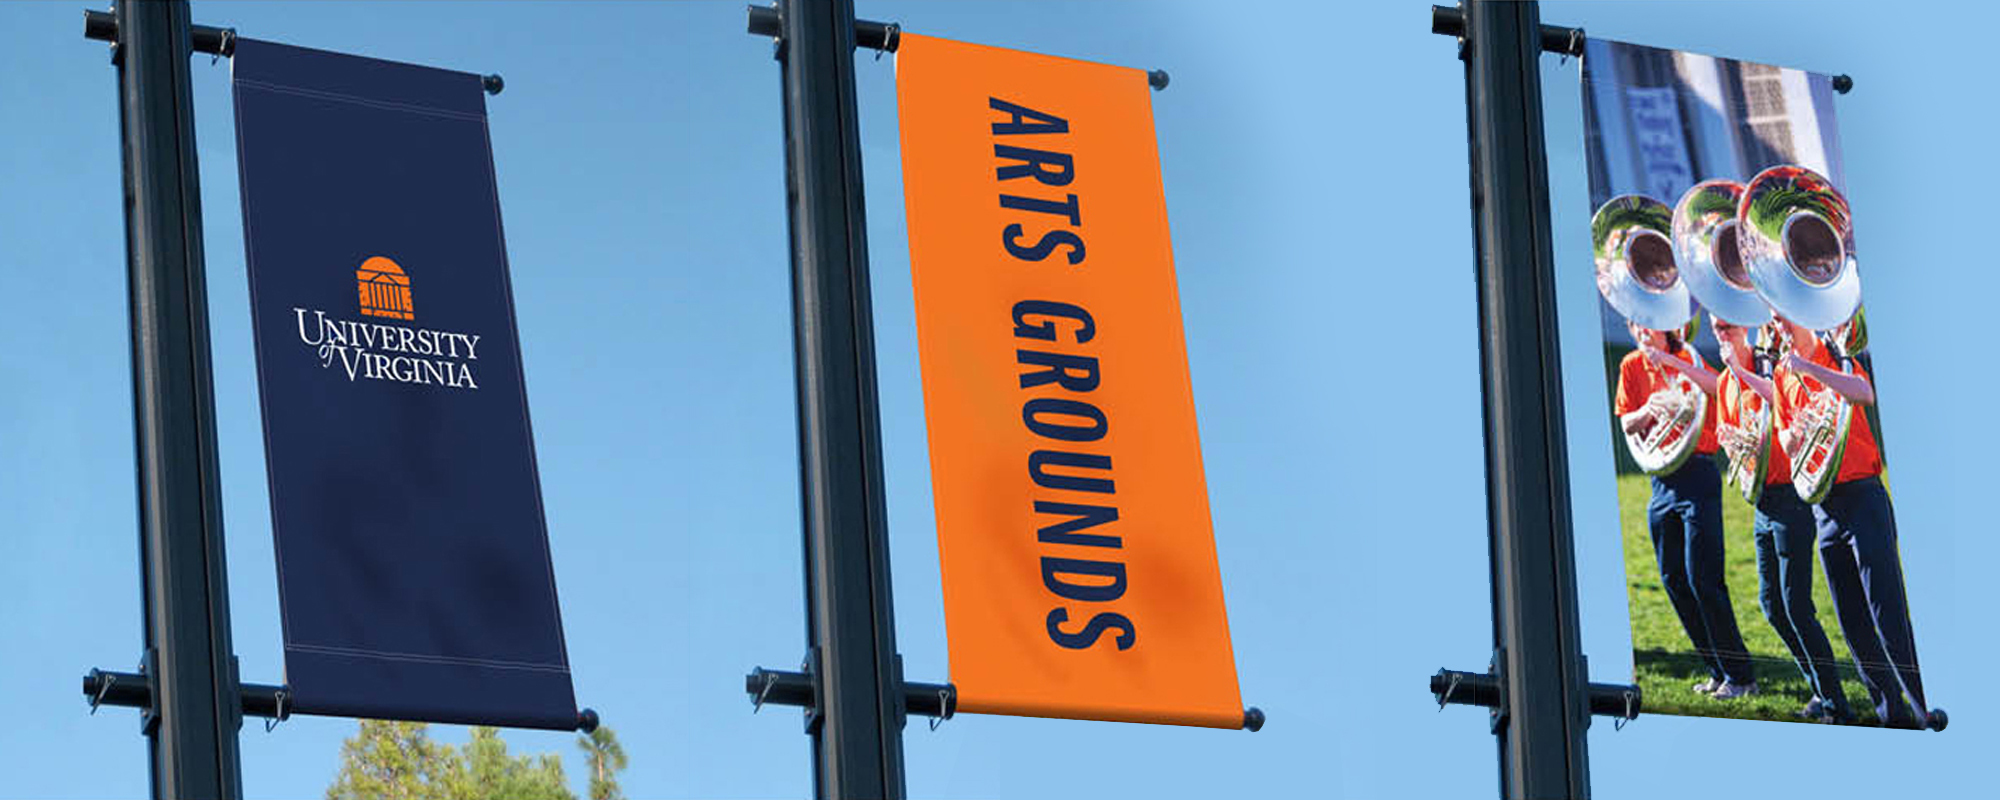 Collage of accepted light pole banners showing the university logo centered on a banner, lettering on a banner, and photography on a banner.  